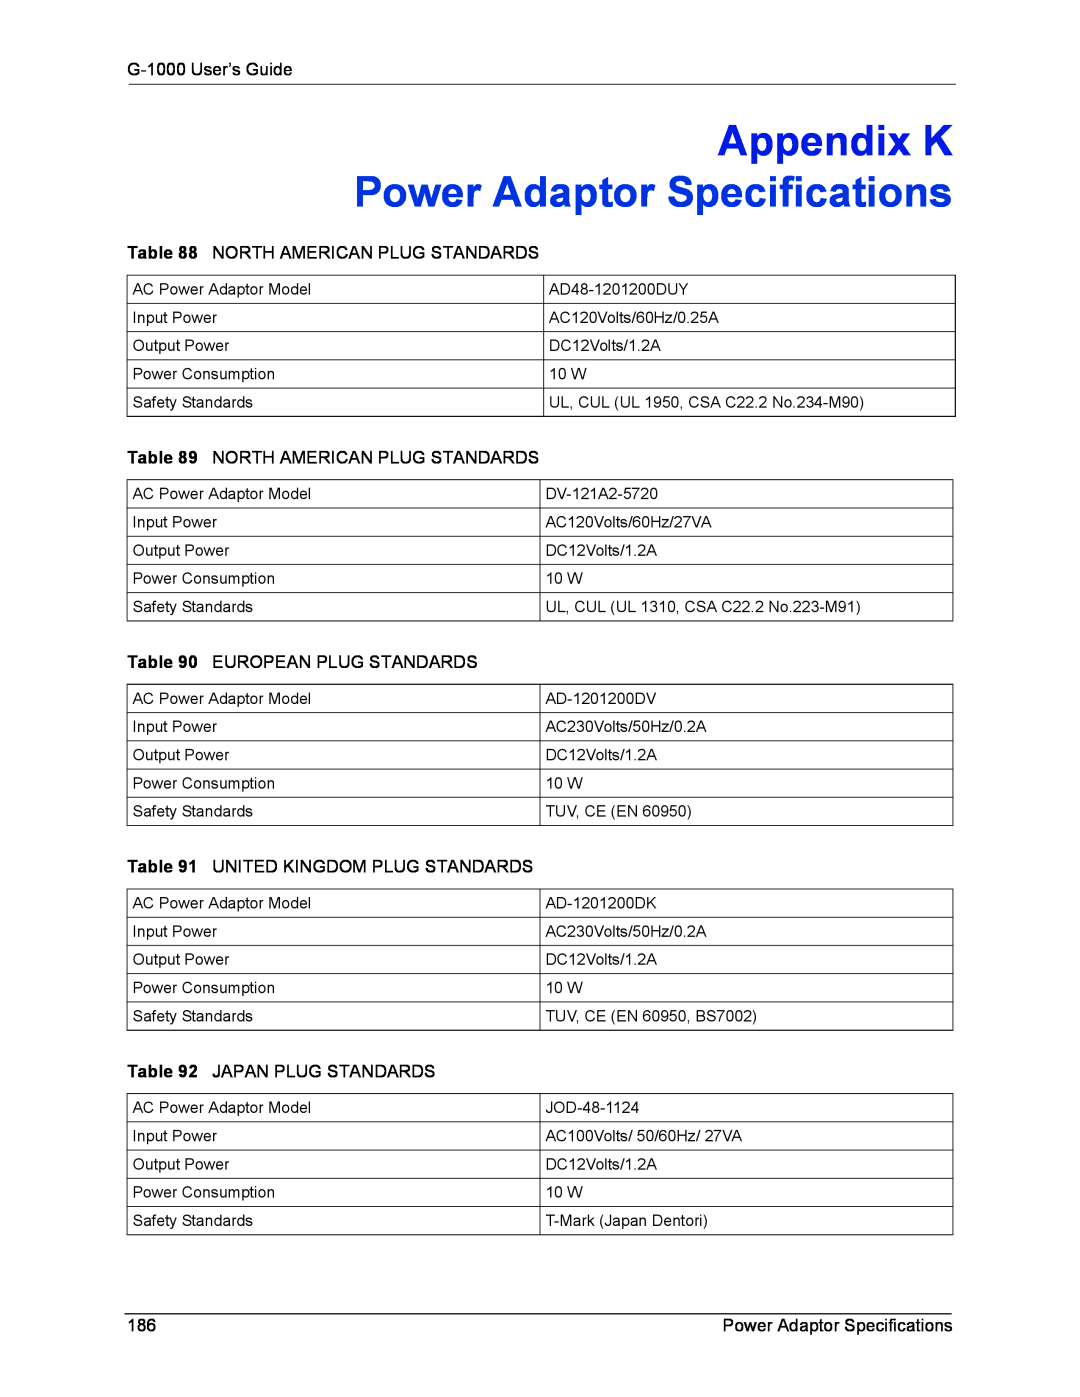 ZyXEL Communications manual Appendix K, Power Adaptor Specifications, G-1000 User’s Guide, North American Plug Standards 